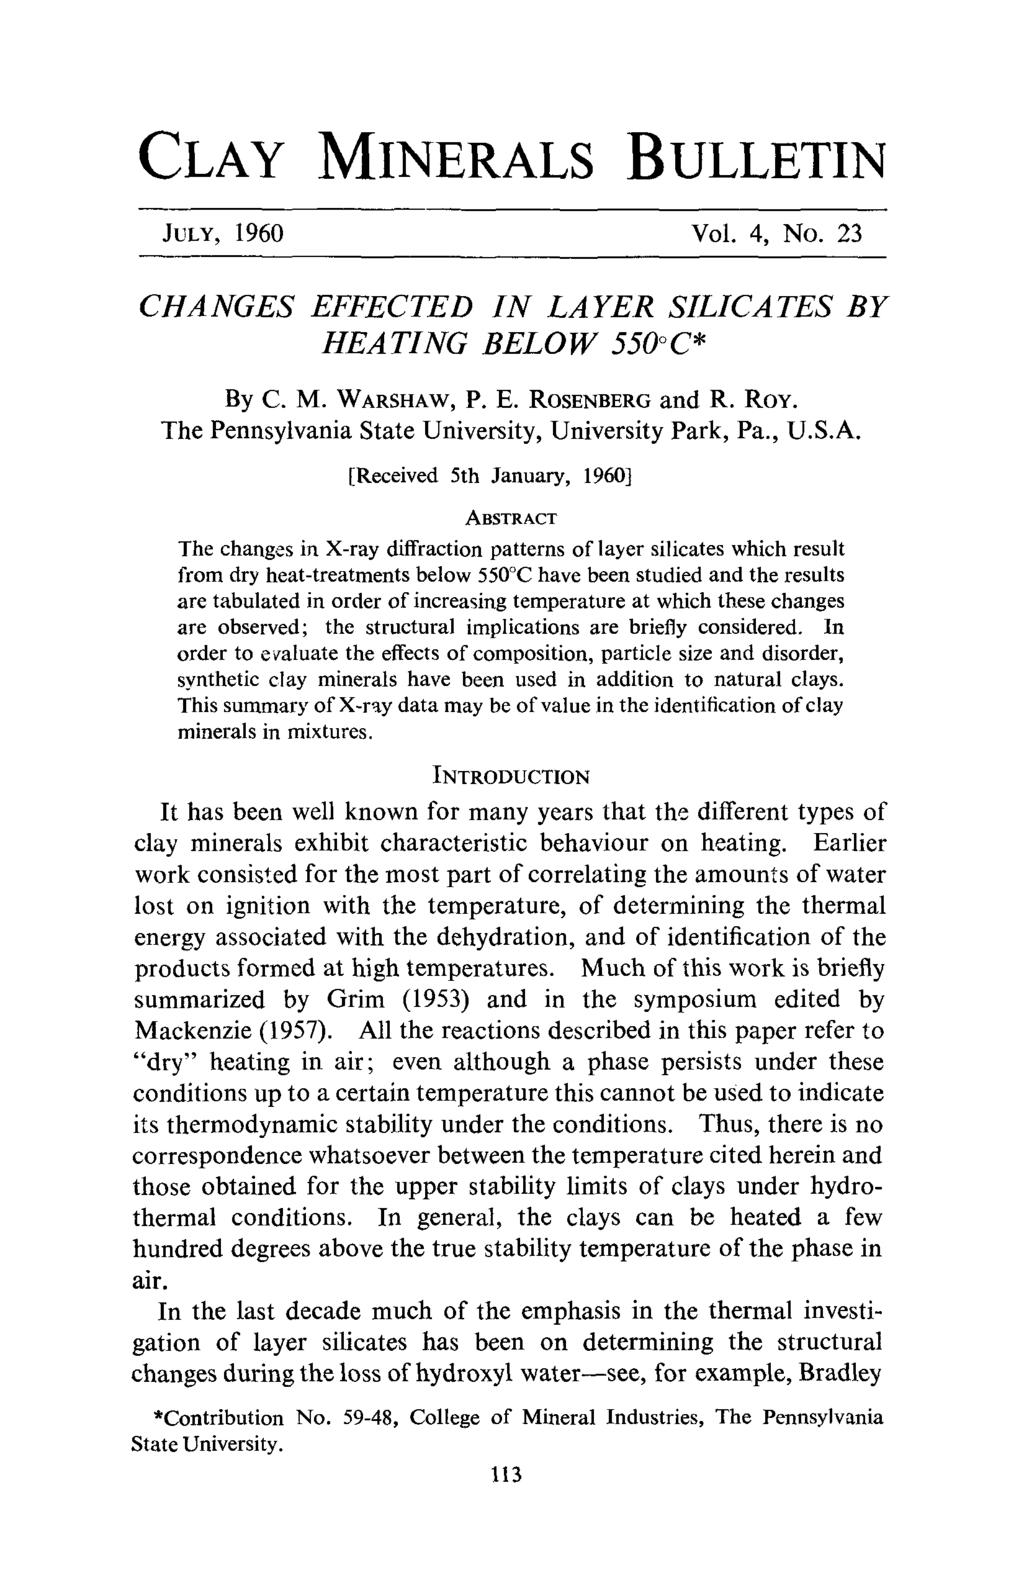 CLAY MINERALS BULLETIN JULY, 196 Vol. 4, No. 23 CHANGES EFFECTED IN LAYER SILICATES BY HEATING BELOW 55~ * By C. M. WARSHAW, P. E. ROSENBERG and R. RoY.